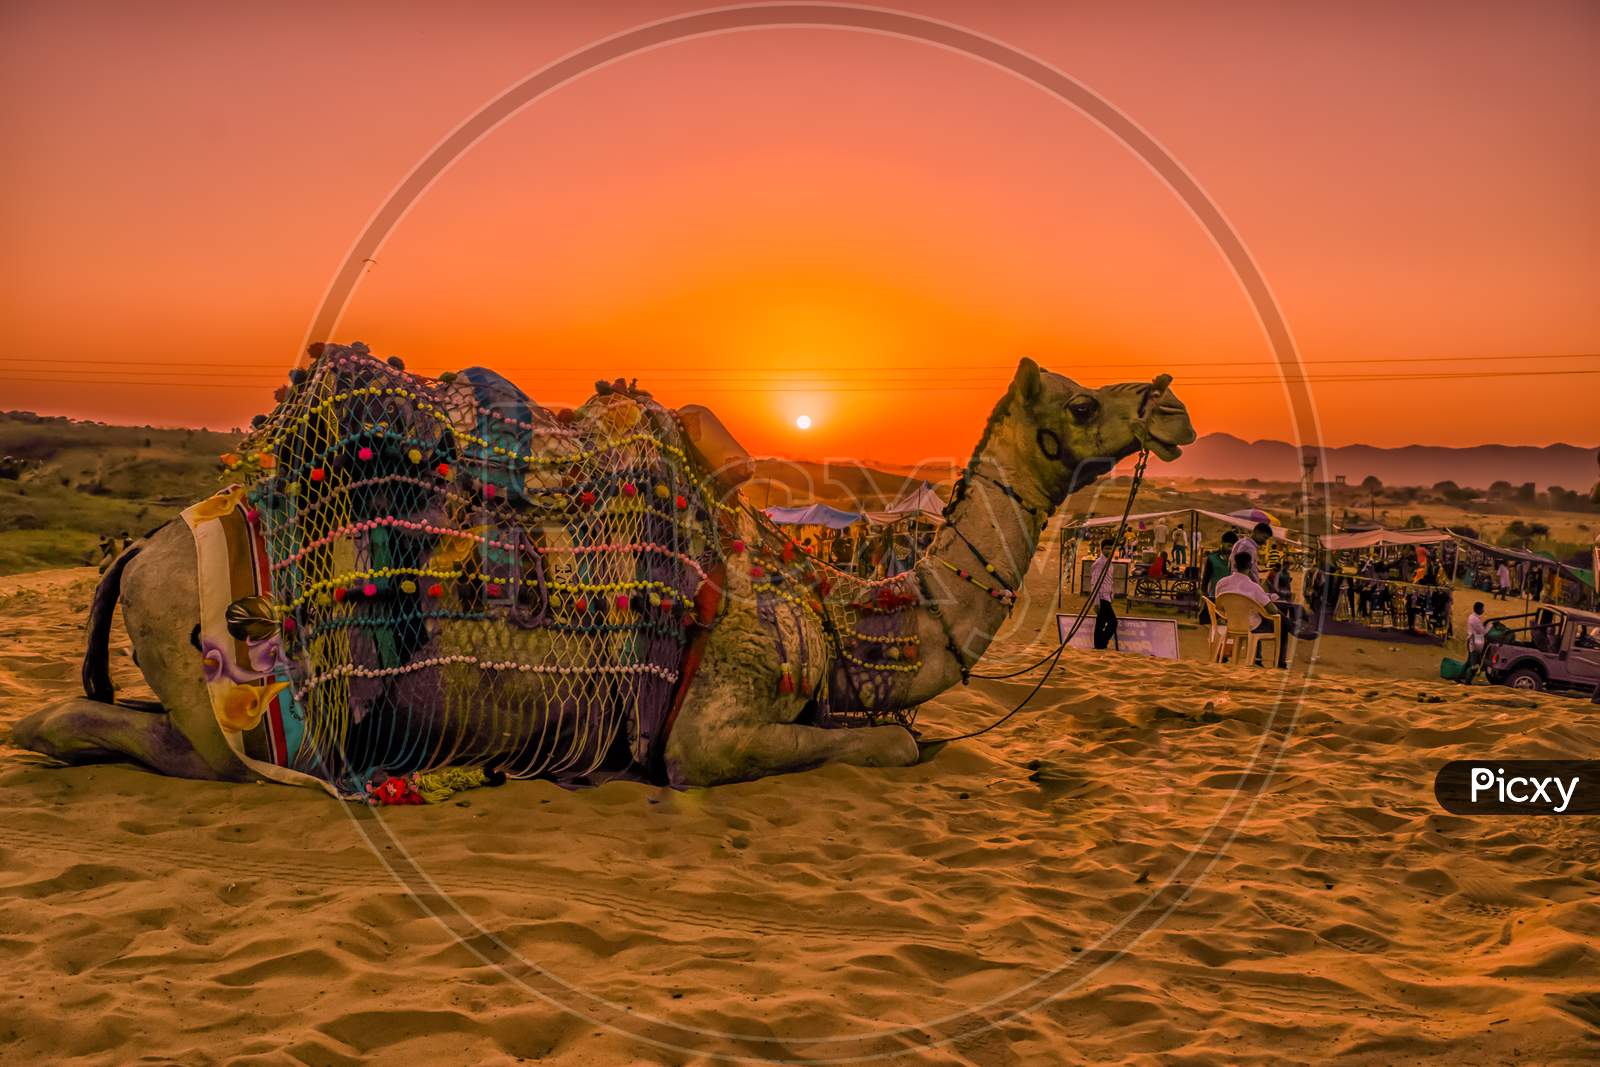 A spectacular sunset in the Thar Desert in Rajasthan, India